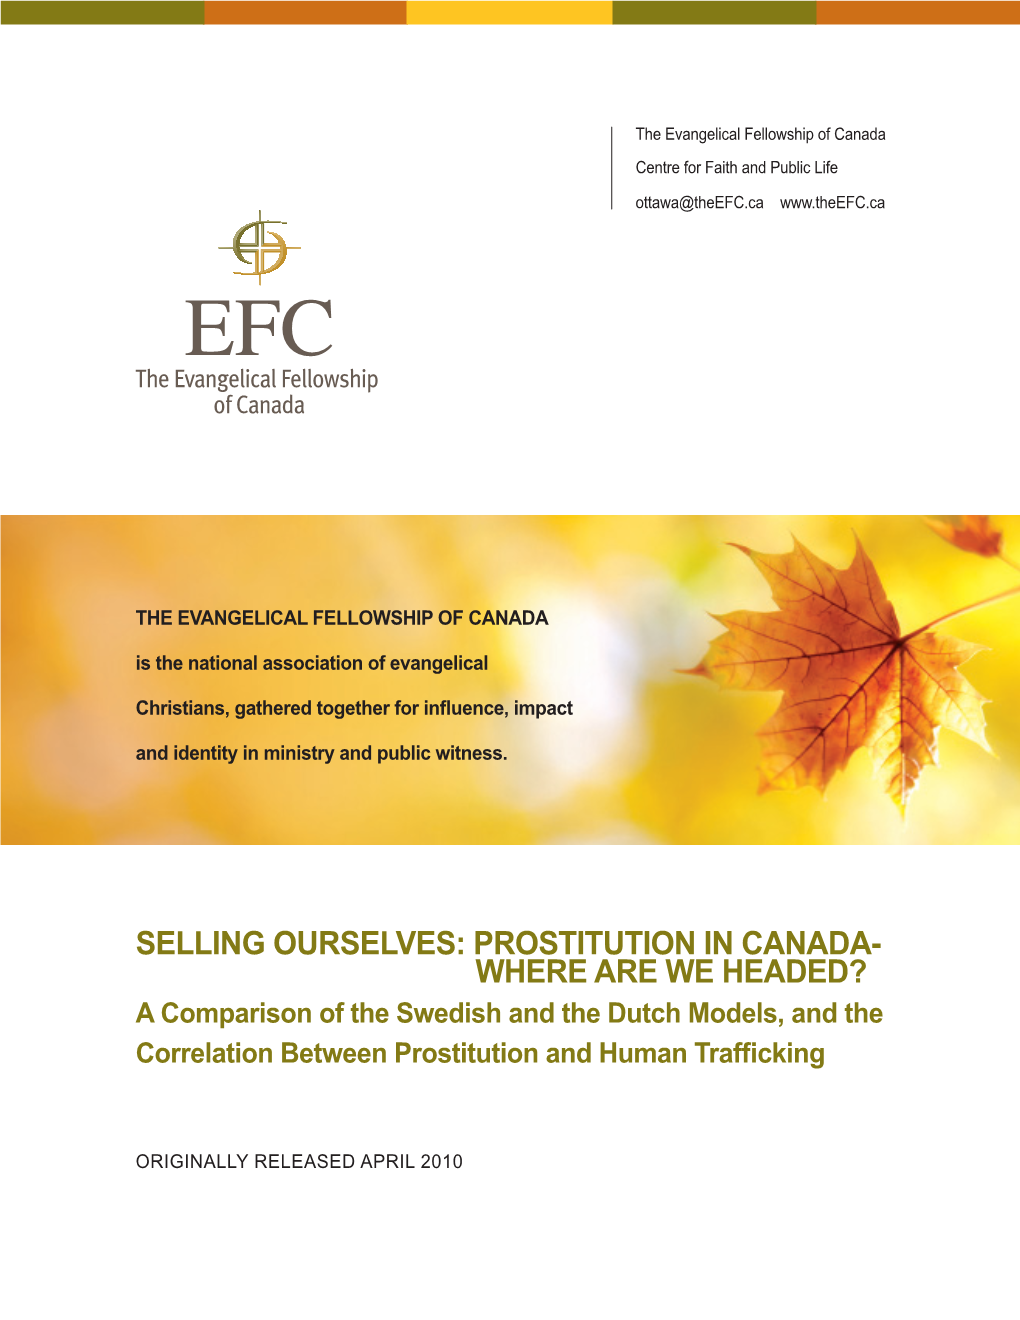 Selling Ourselves: Prostitution in Canada